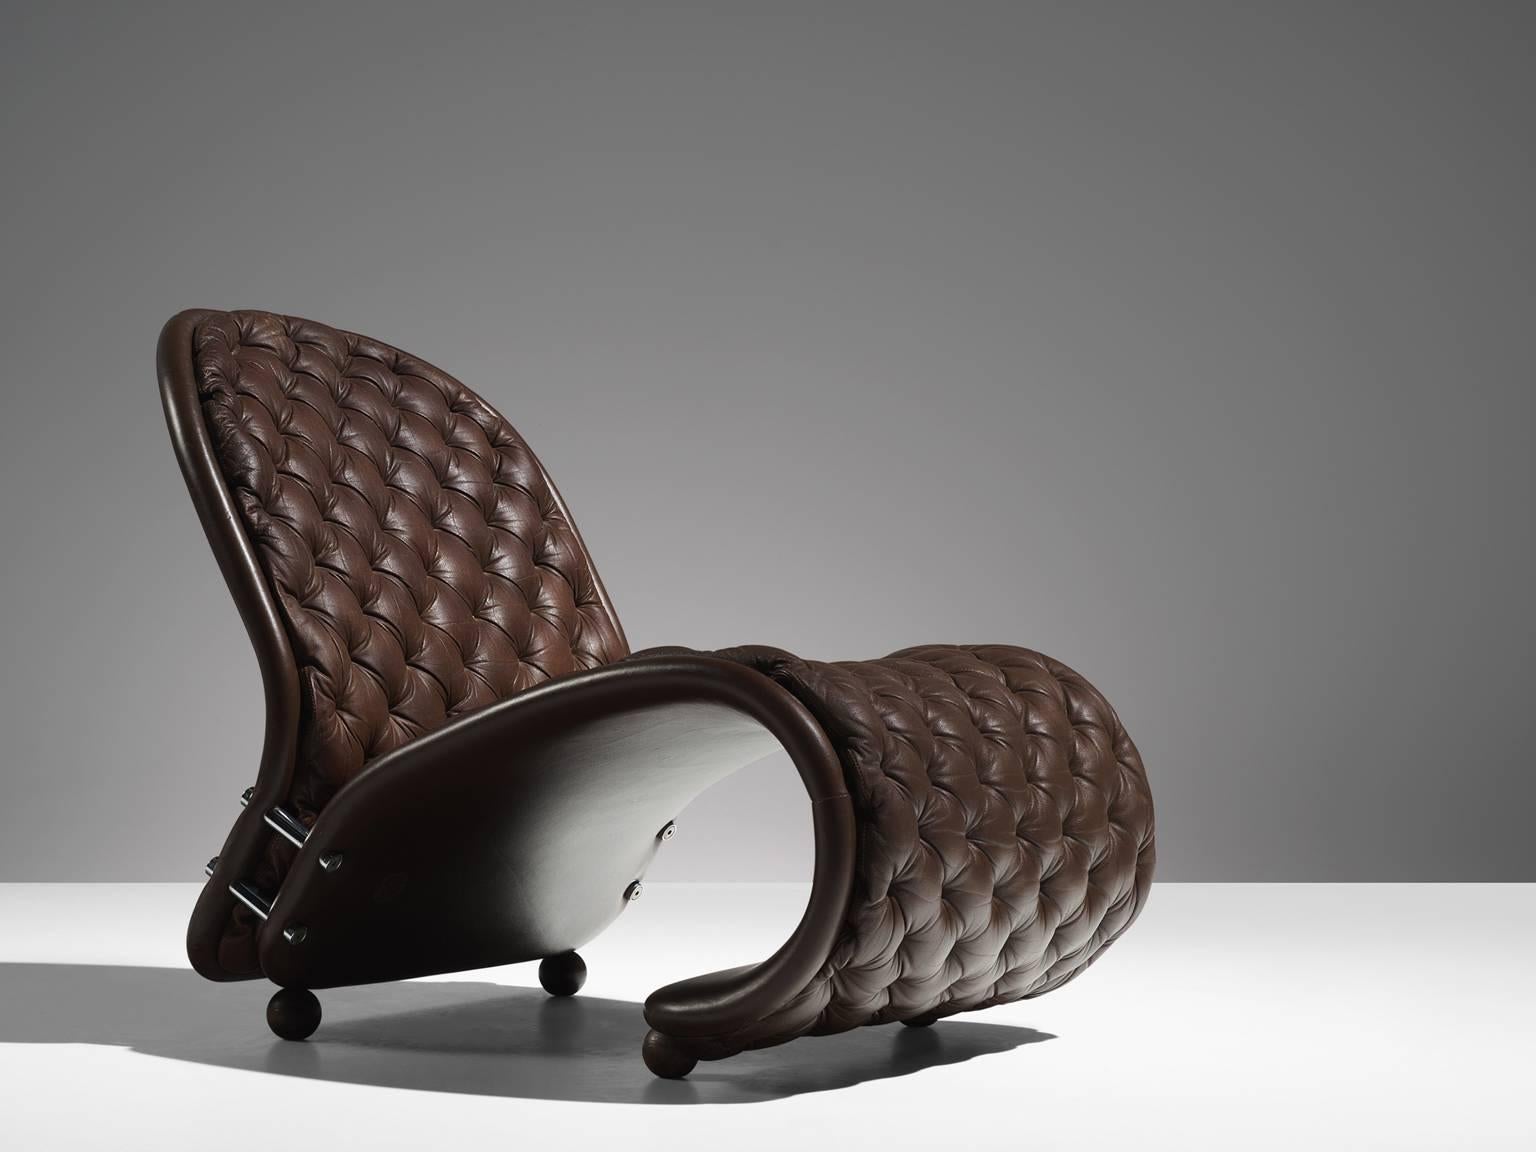 Verner Panton for Fritz Hansen, easy chair 'Model G', in brown leather, Denmark, 1973. 

'Model G' chair from the 1-2-3 system in dark brown tufted leather. This lounge chair features a distinctive shape. This icon is designed by Verner Panton in